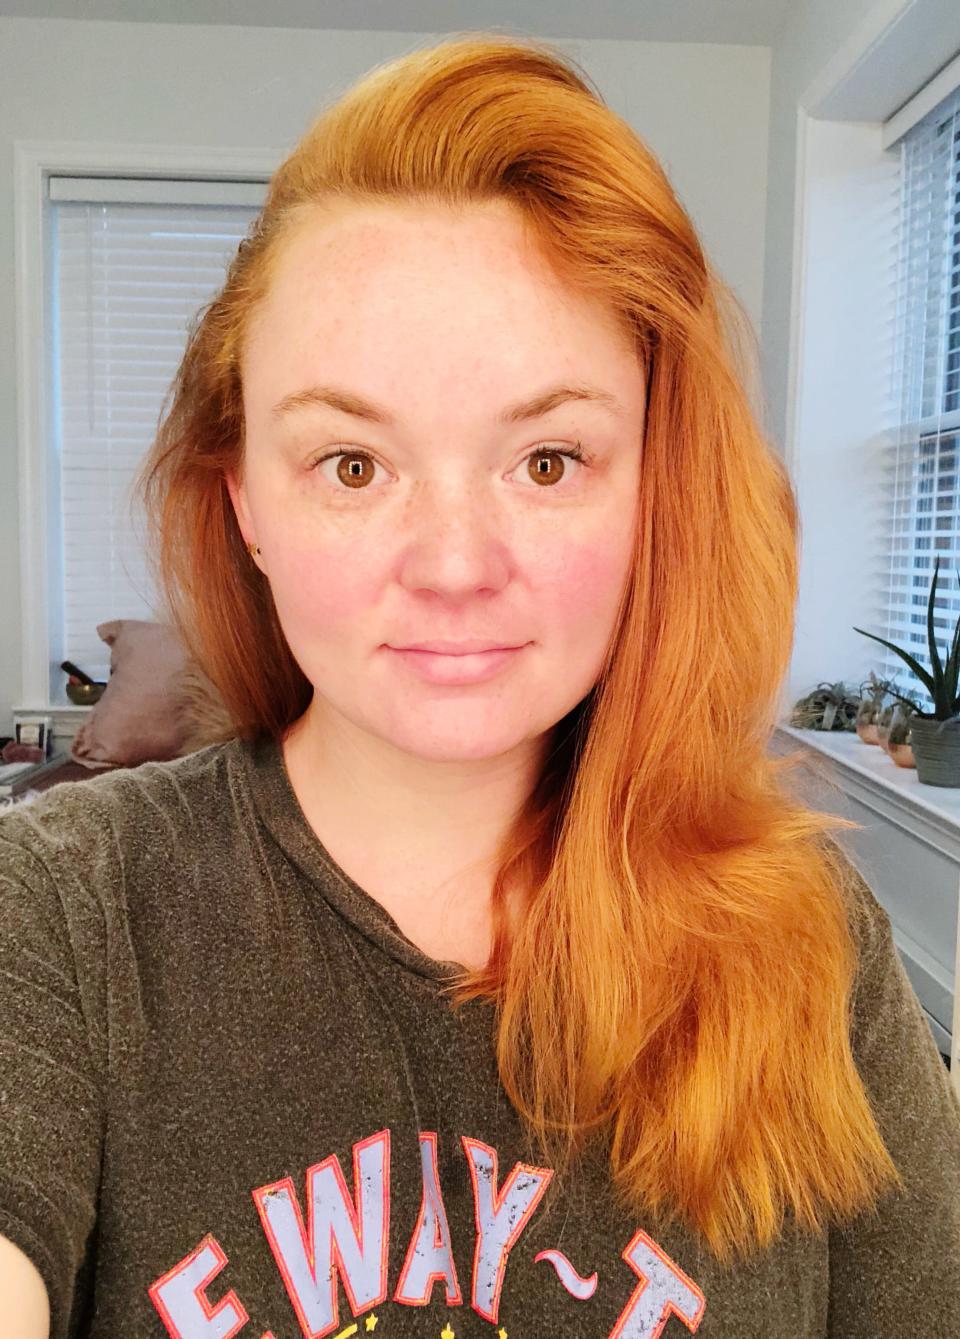 Girl with red hair and no makeup on.